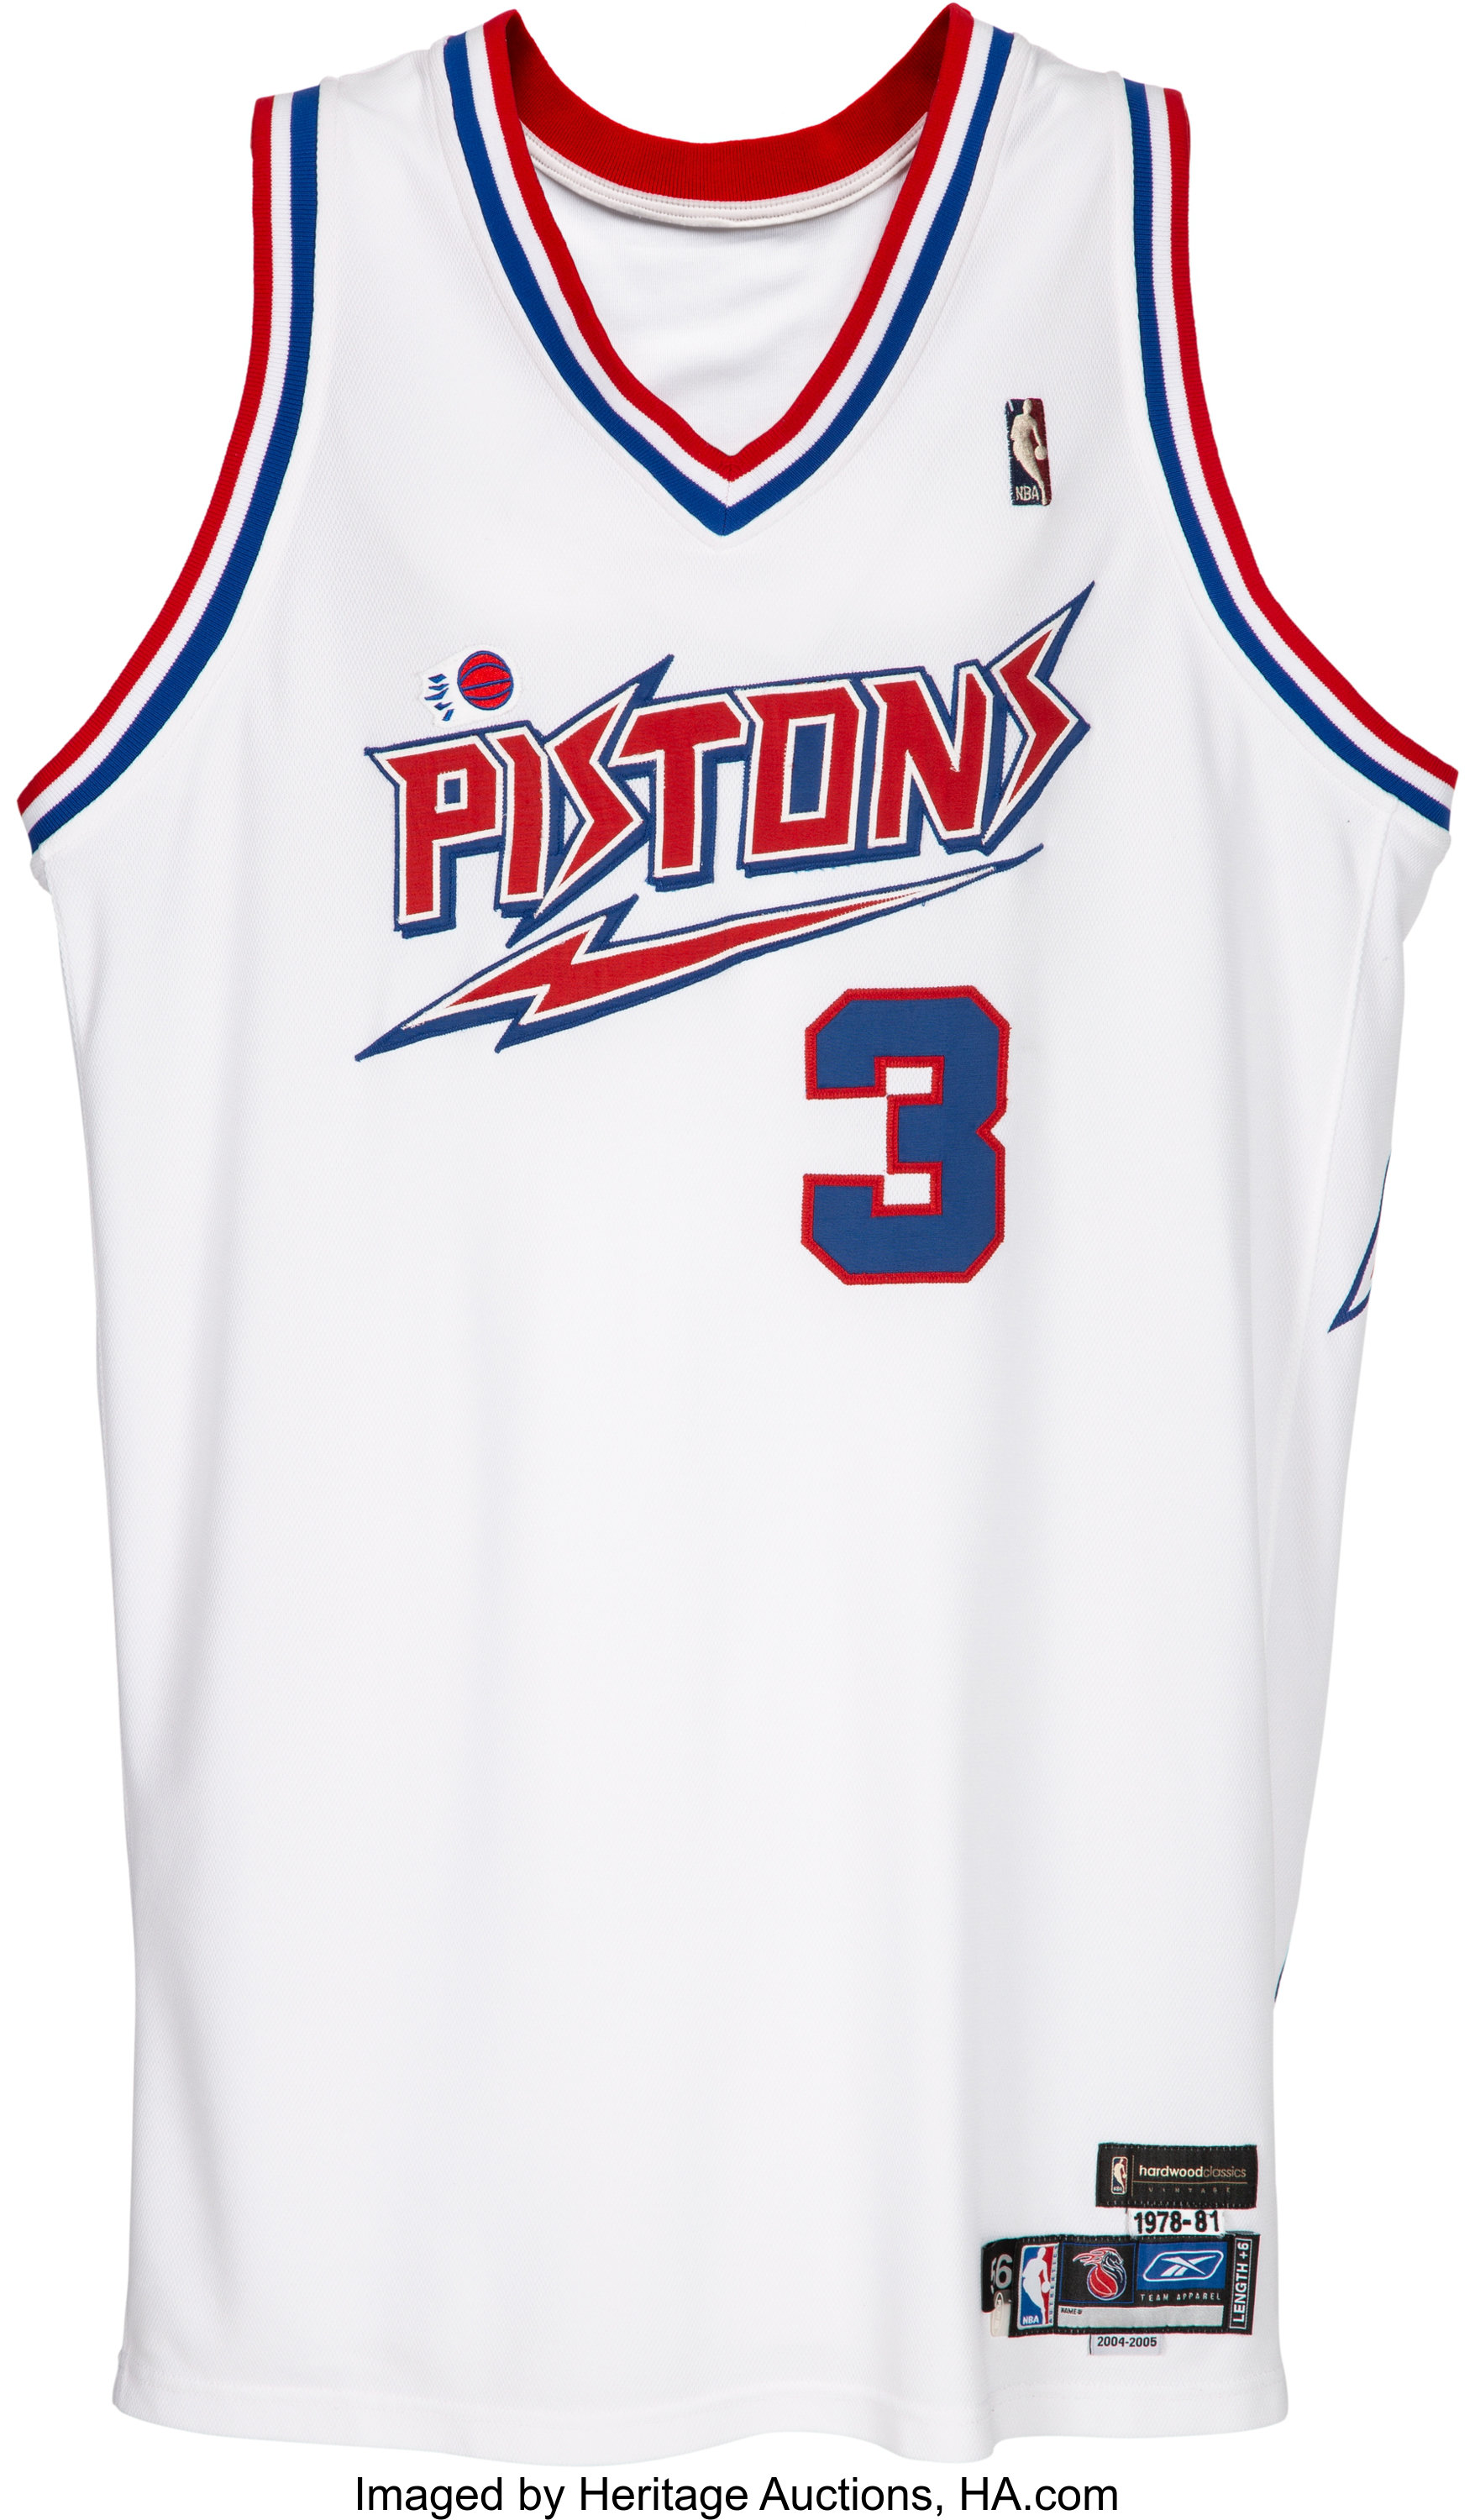 2004-05 Detroit Pistons Blank Game Issued White Jersey 52+6 588